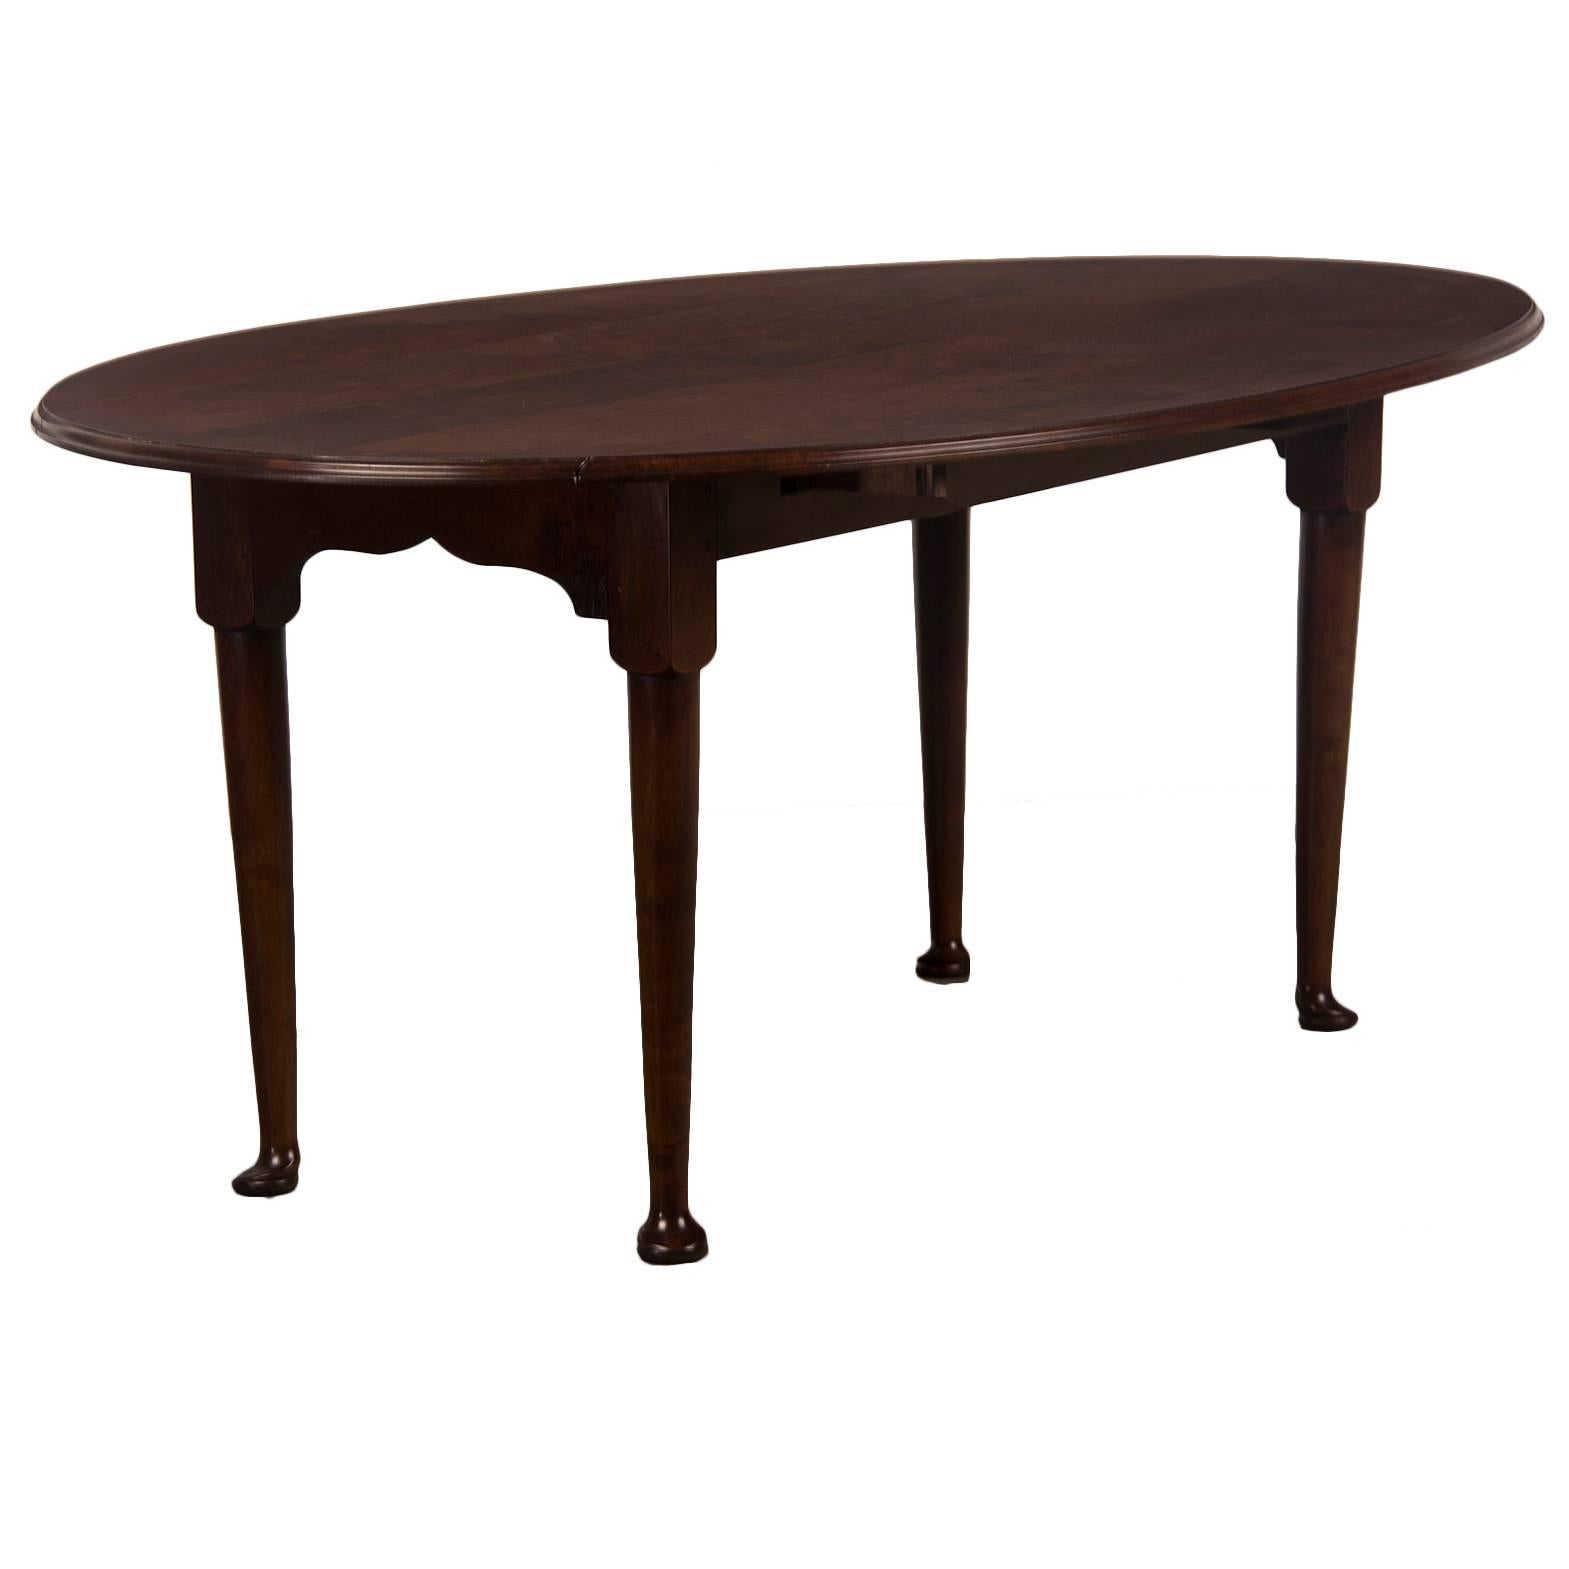 English Bespoke Made Oval Cherrywood Drop-Leaf Dining Table  For Sale